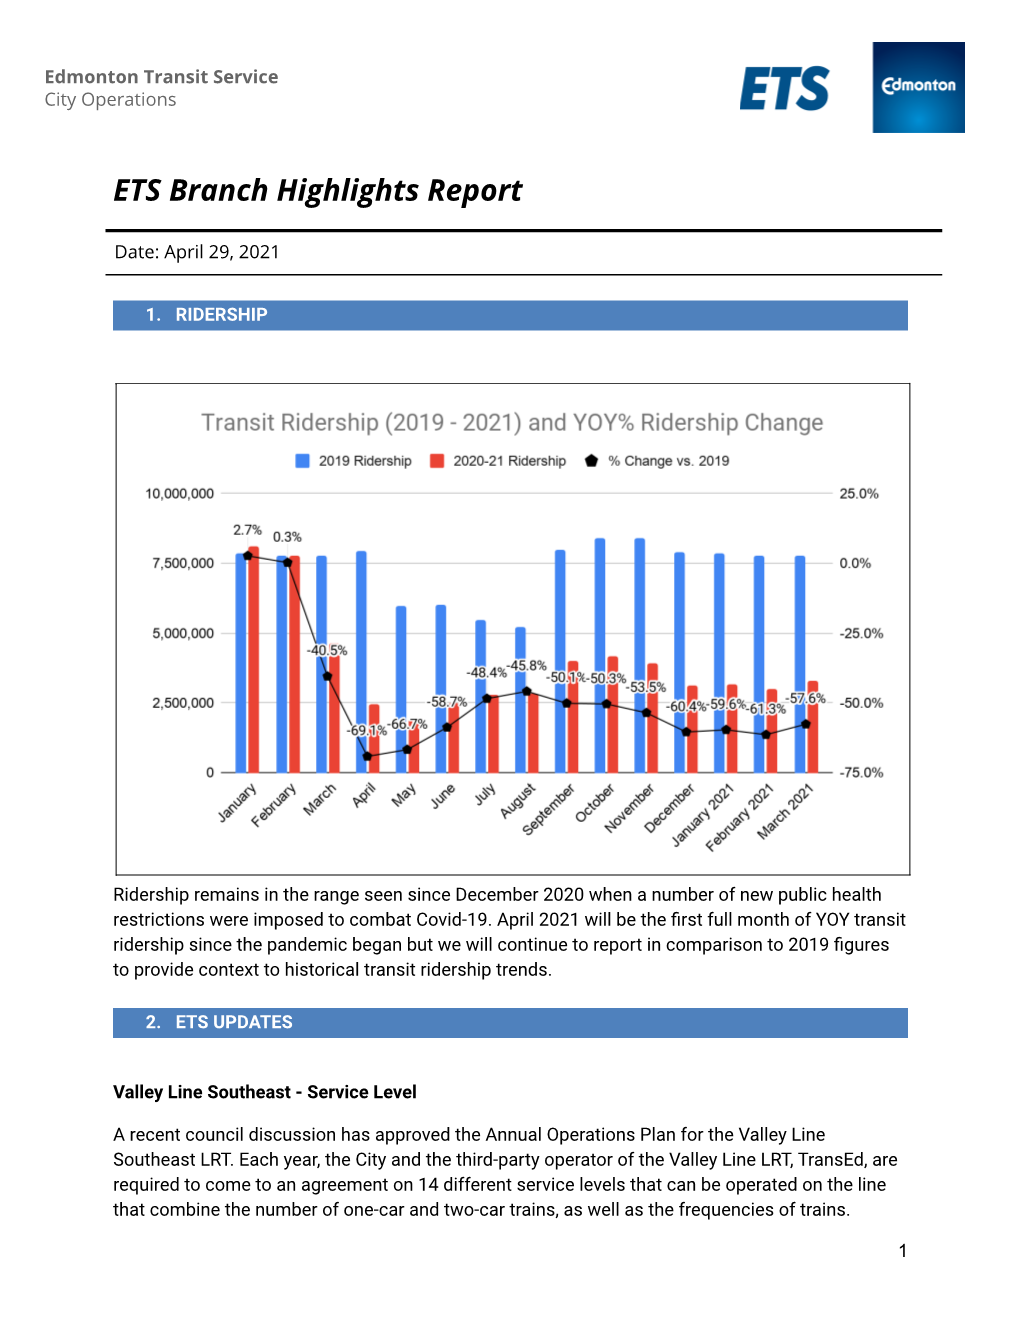 ETS Branch Highlights Report to ETSAB for 2021